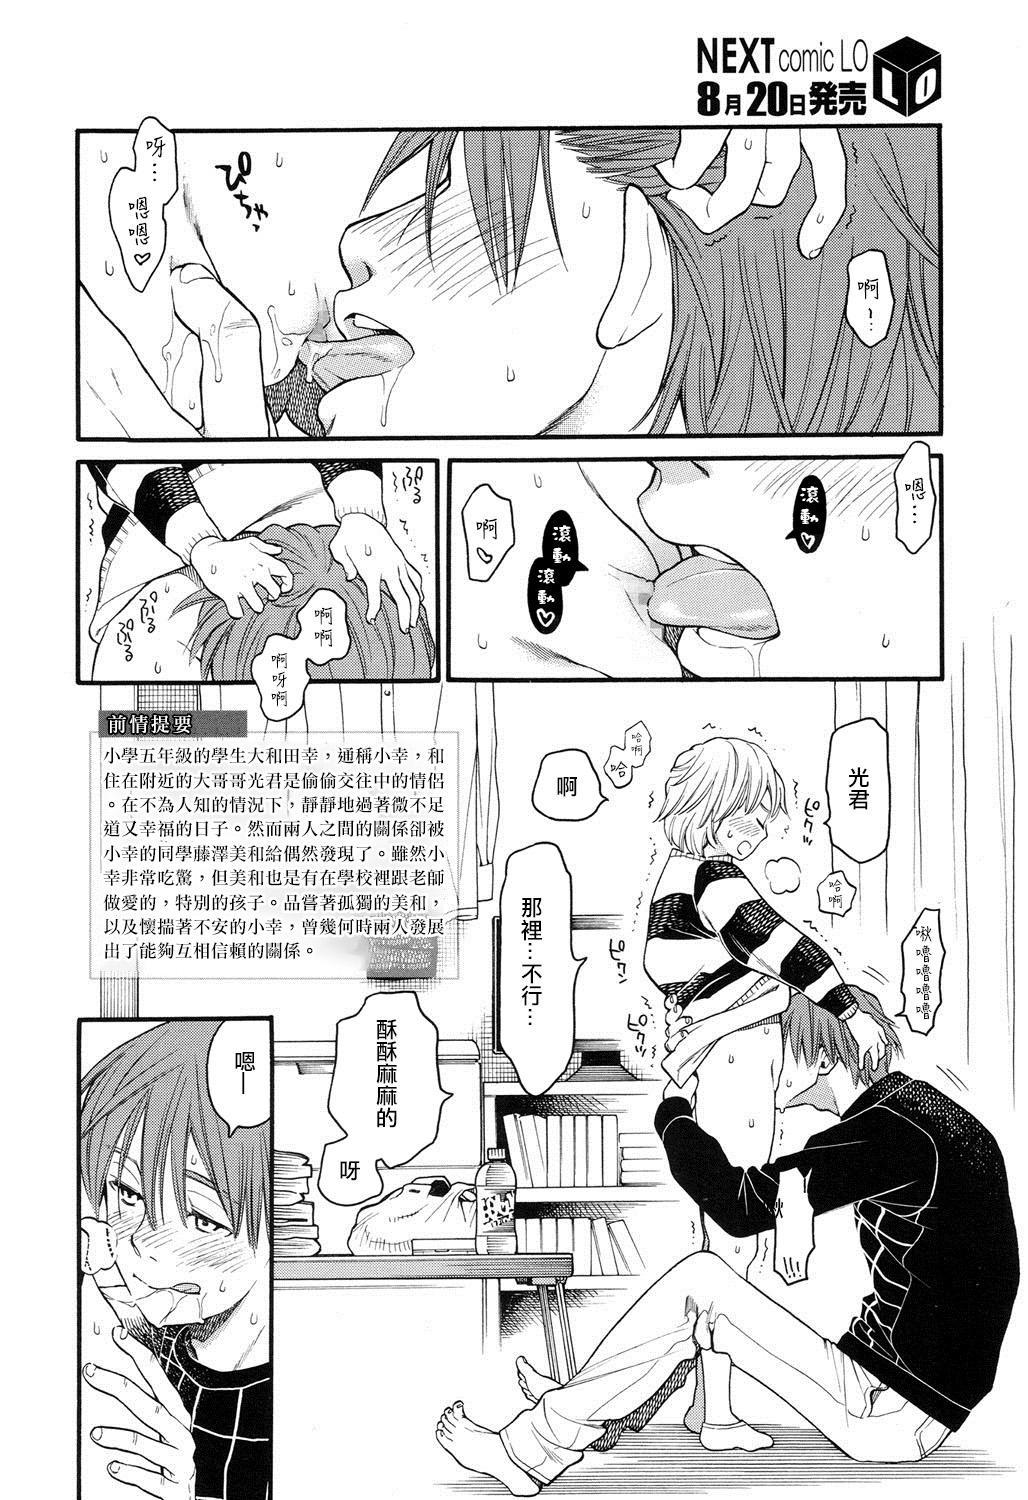 Perra みずいろ Oral - Page 2